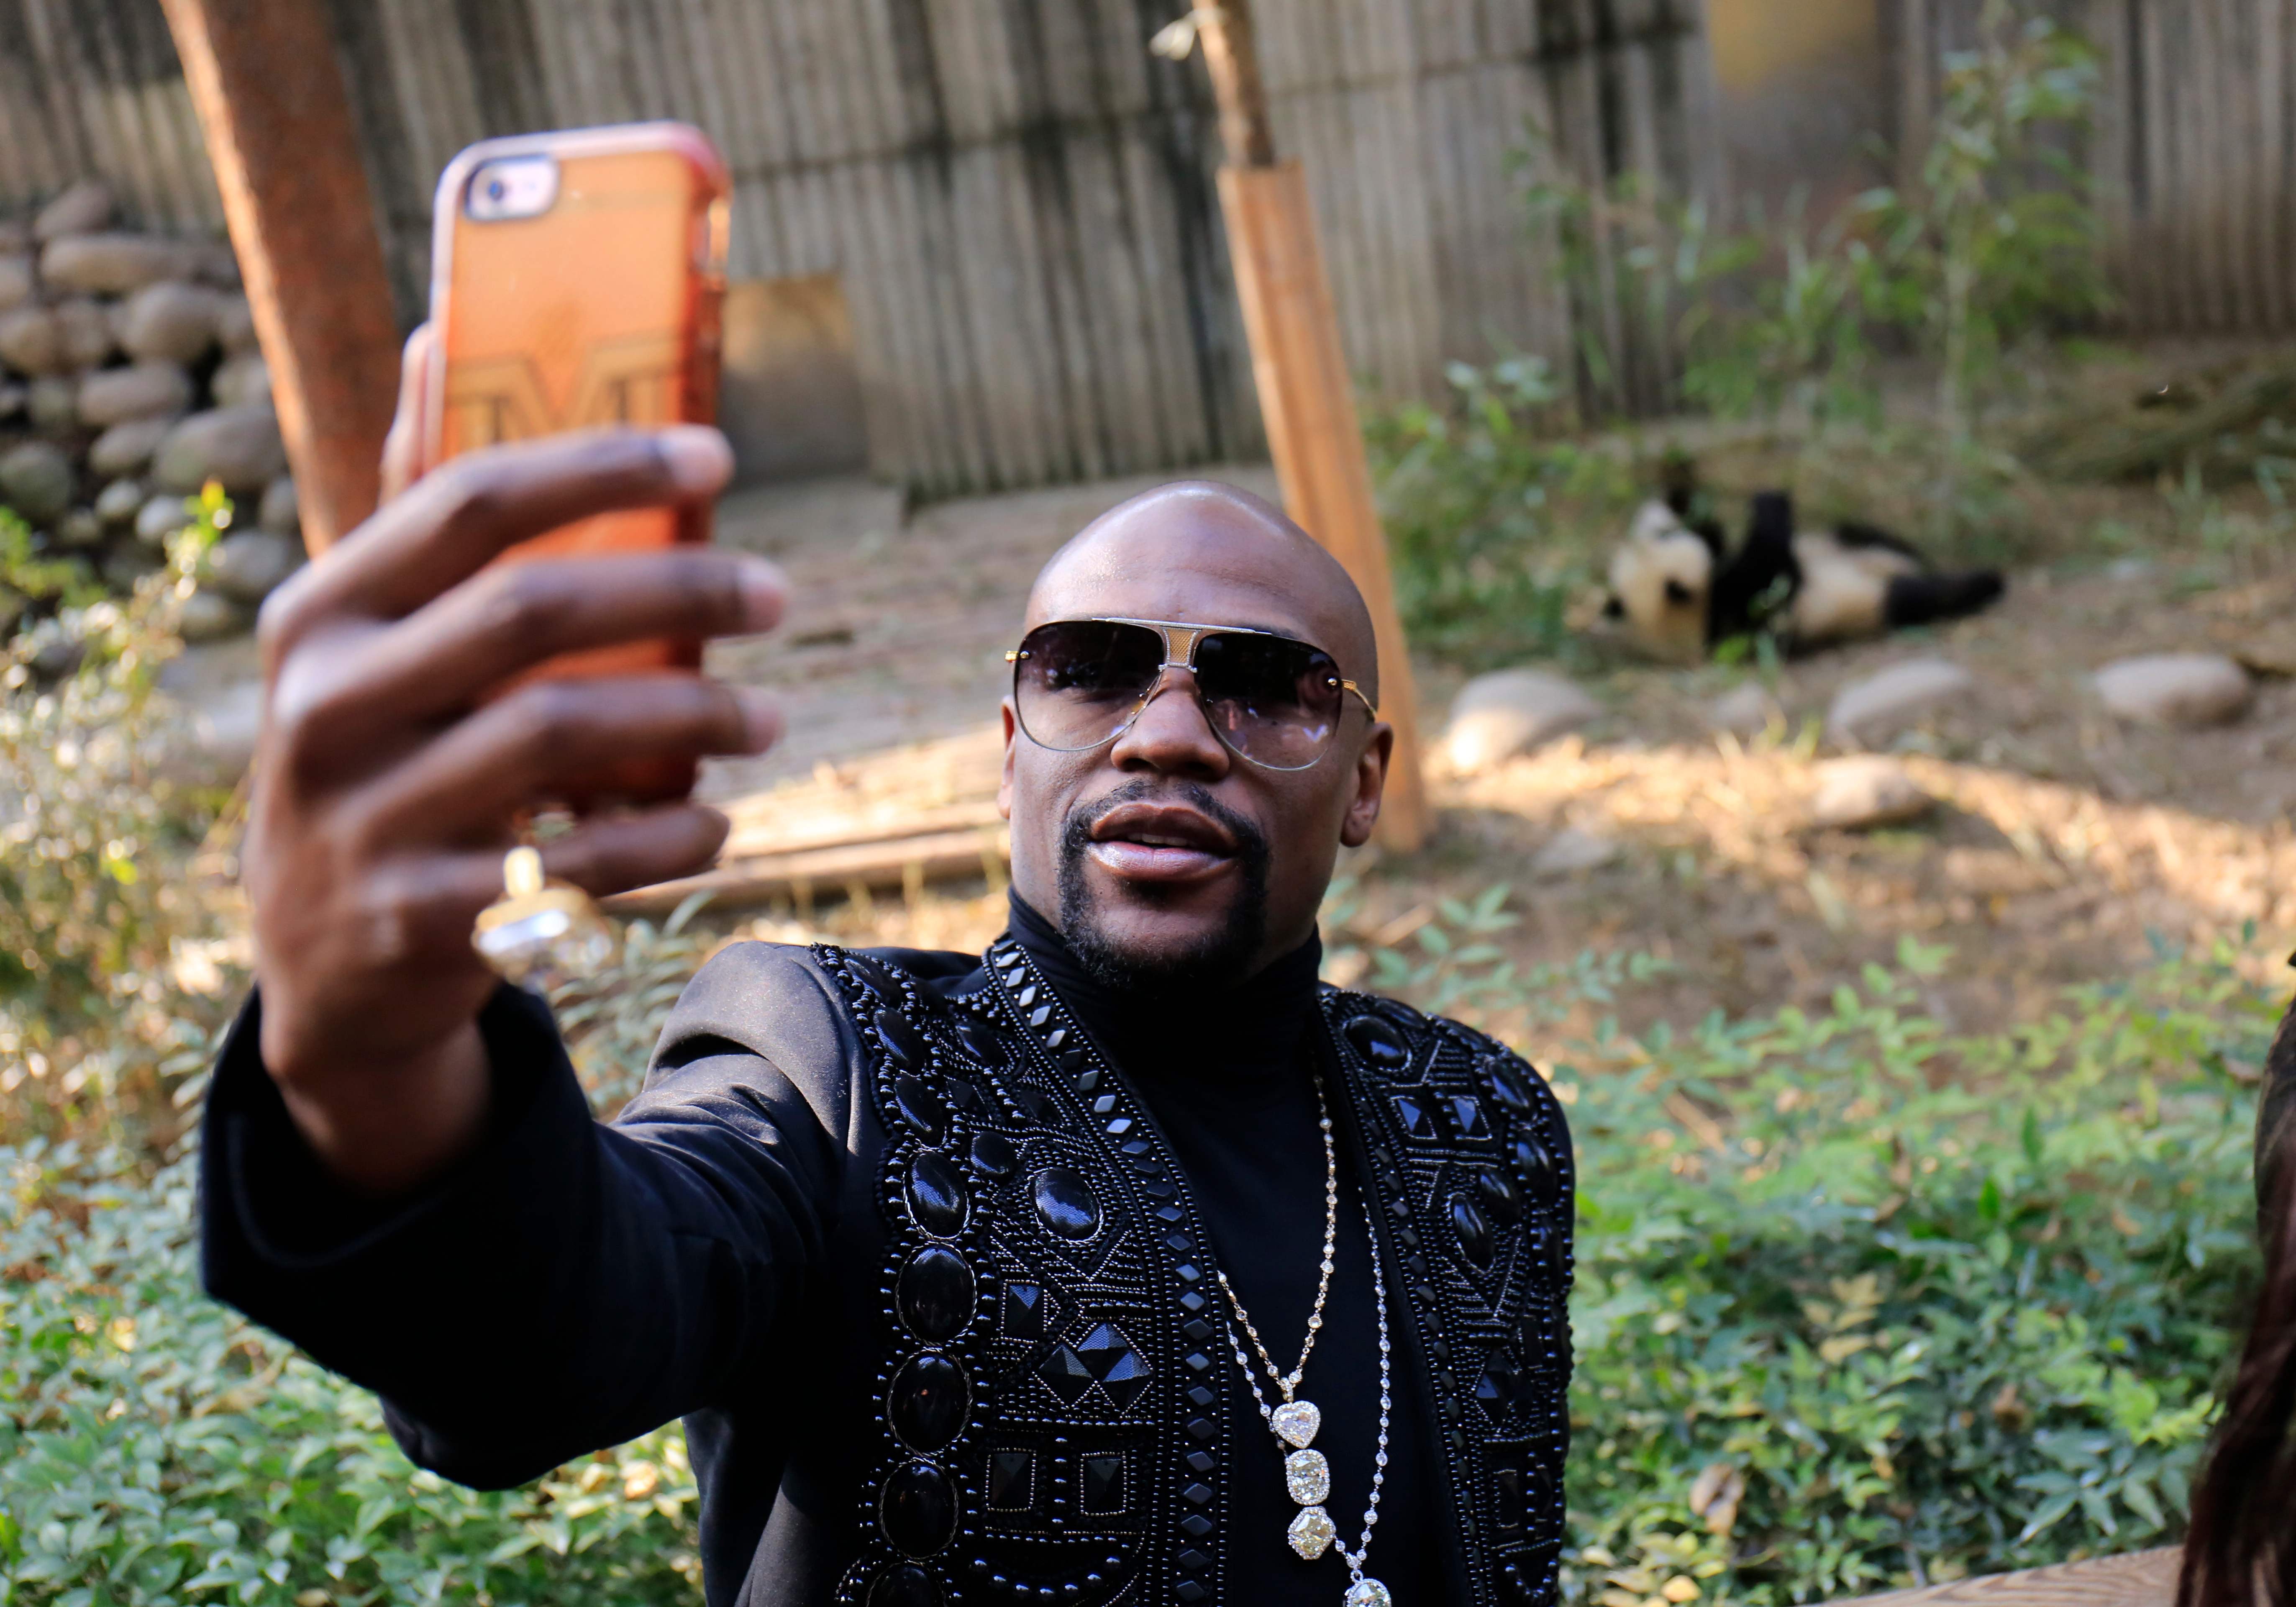 Floyd Mayweather Jnr takes a selfie with his adopted ‘TMT Floyd Mayweather’ at the Chengdu Research Base of Giant Panda Breeding while on his luxury vacation in China. Photo: AFP